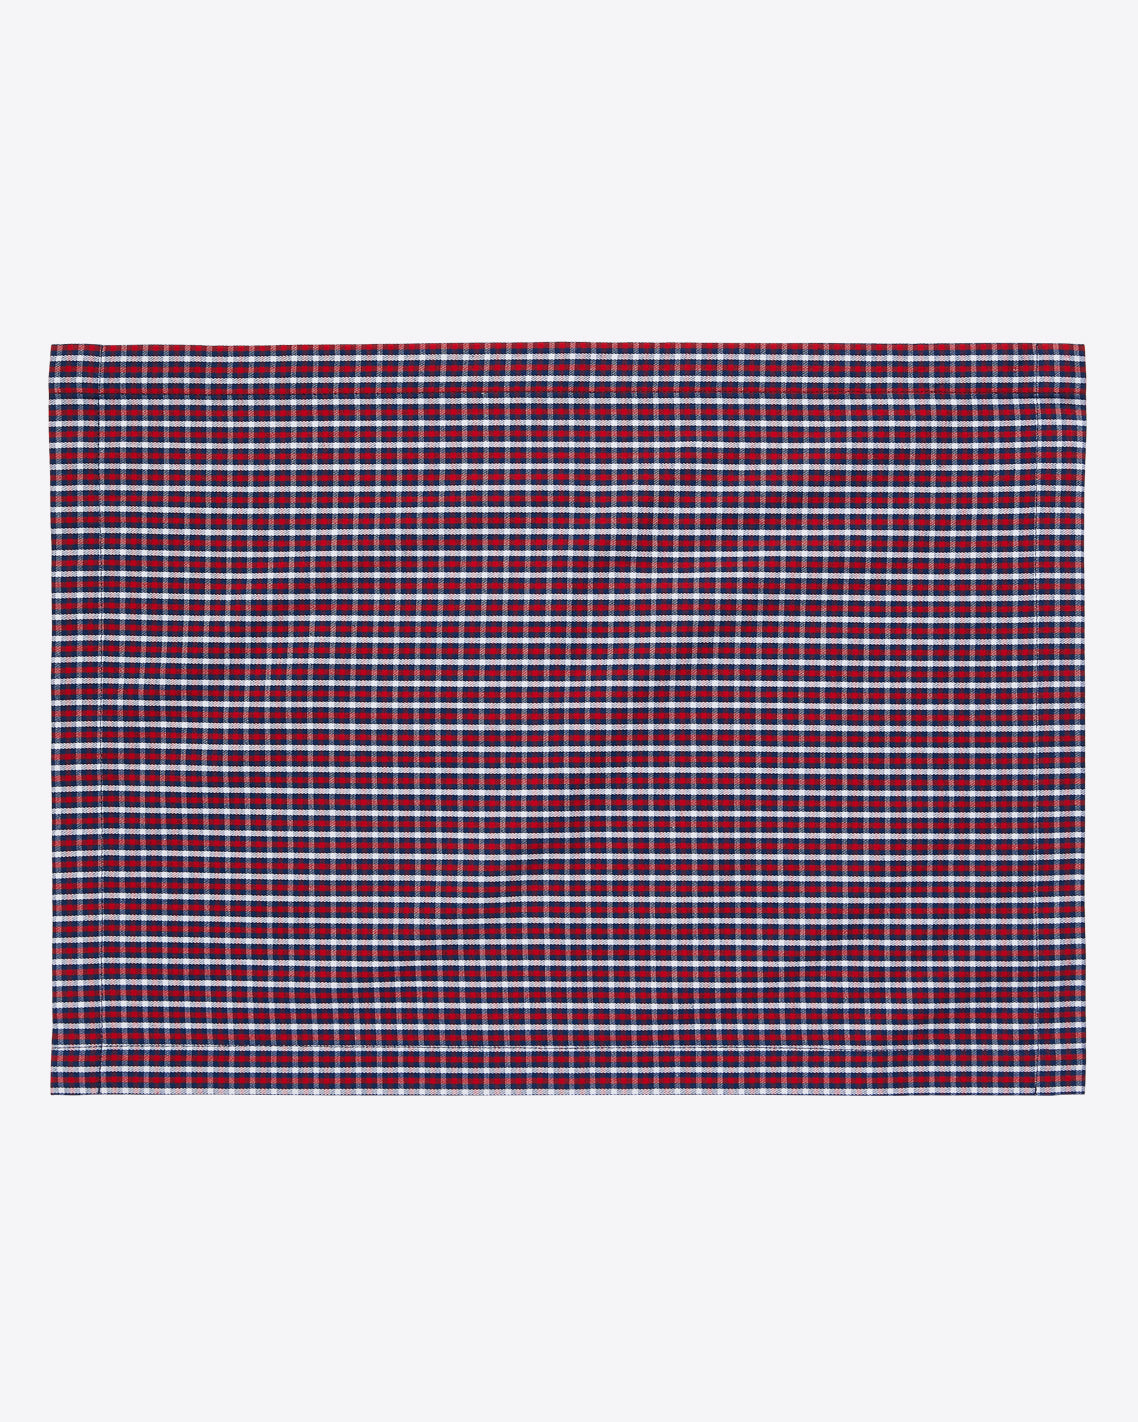 Placemats in Picnic Plaid, set of 4